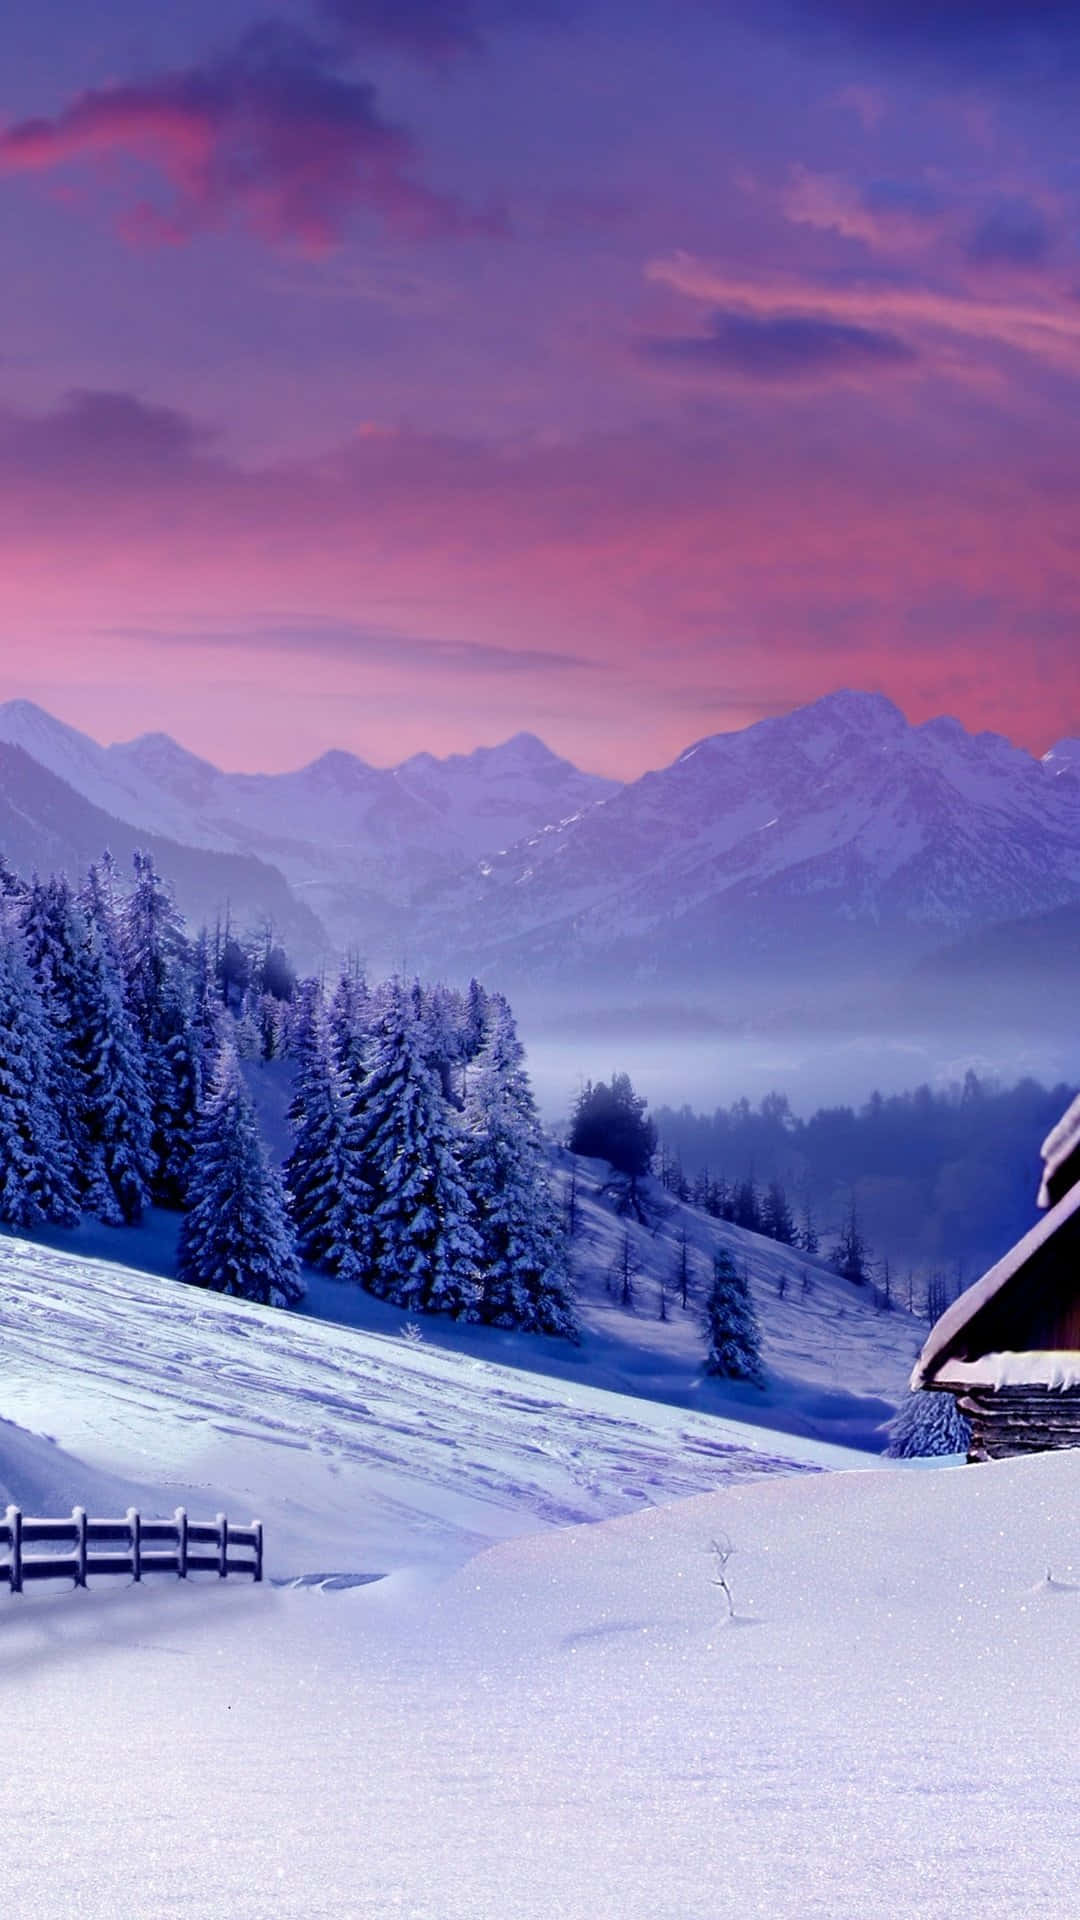 "A winter walk through the beautiful snow-covered landscape" Wallpaper